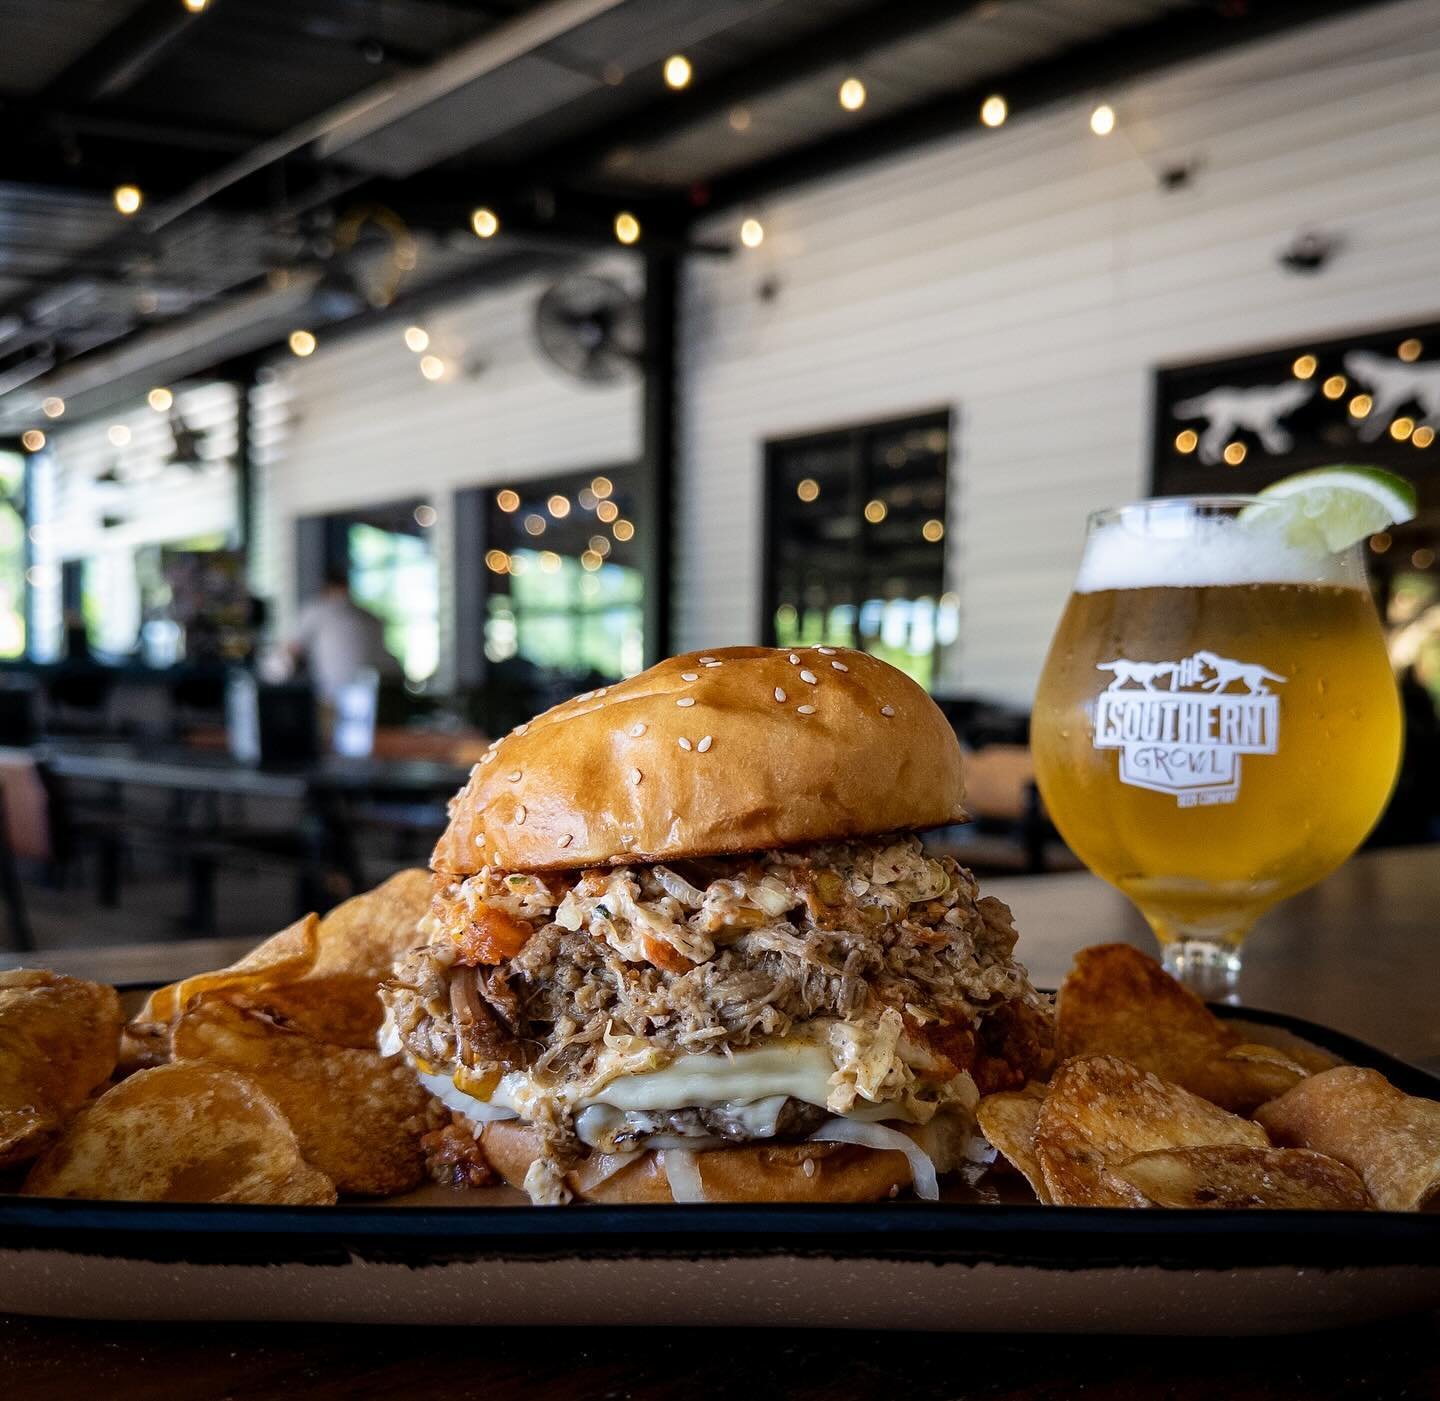 Weekly Special Sandwich, available all week:

CARNITAS CARNIVAL BURGER
topped with american cheese, carnitas, chipotle salsa, mexican pickled white onions, and elote slaw on a house sesame bun.

Pair with Chillsner - Pilsner with lime.

Special Sandw